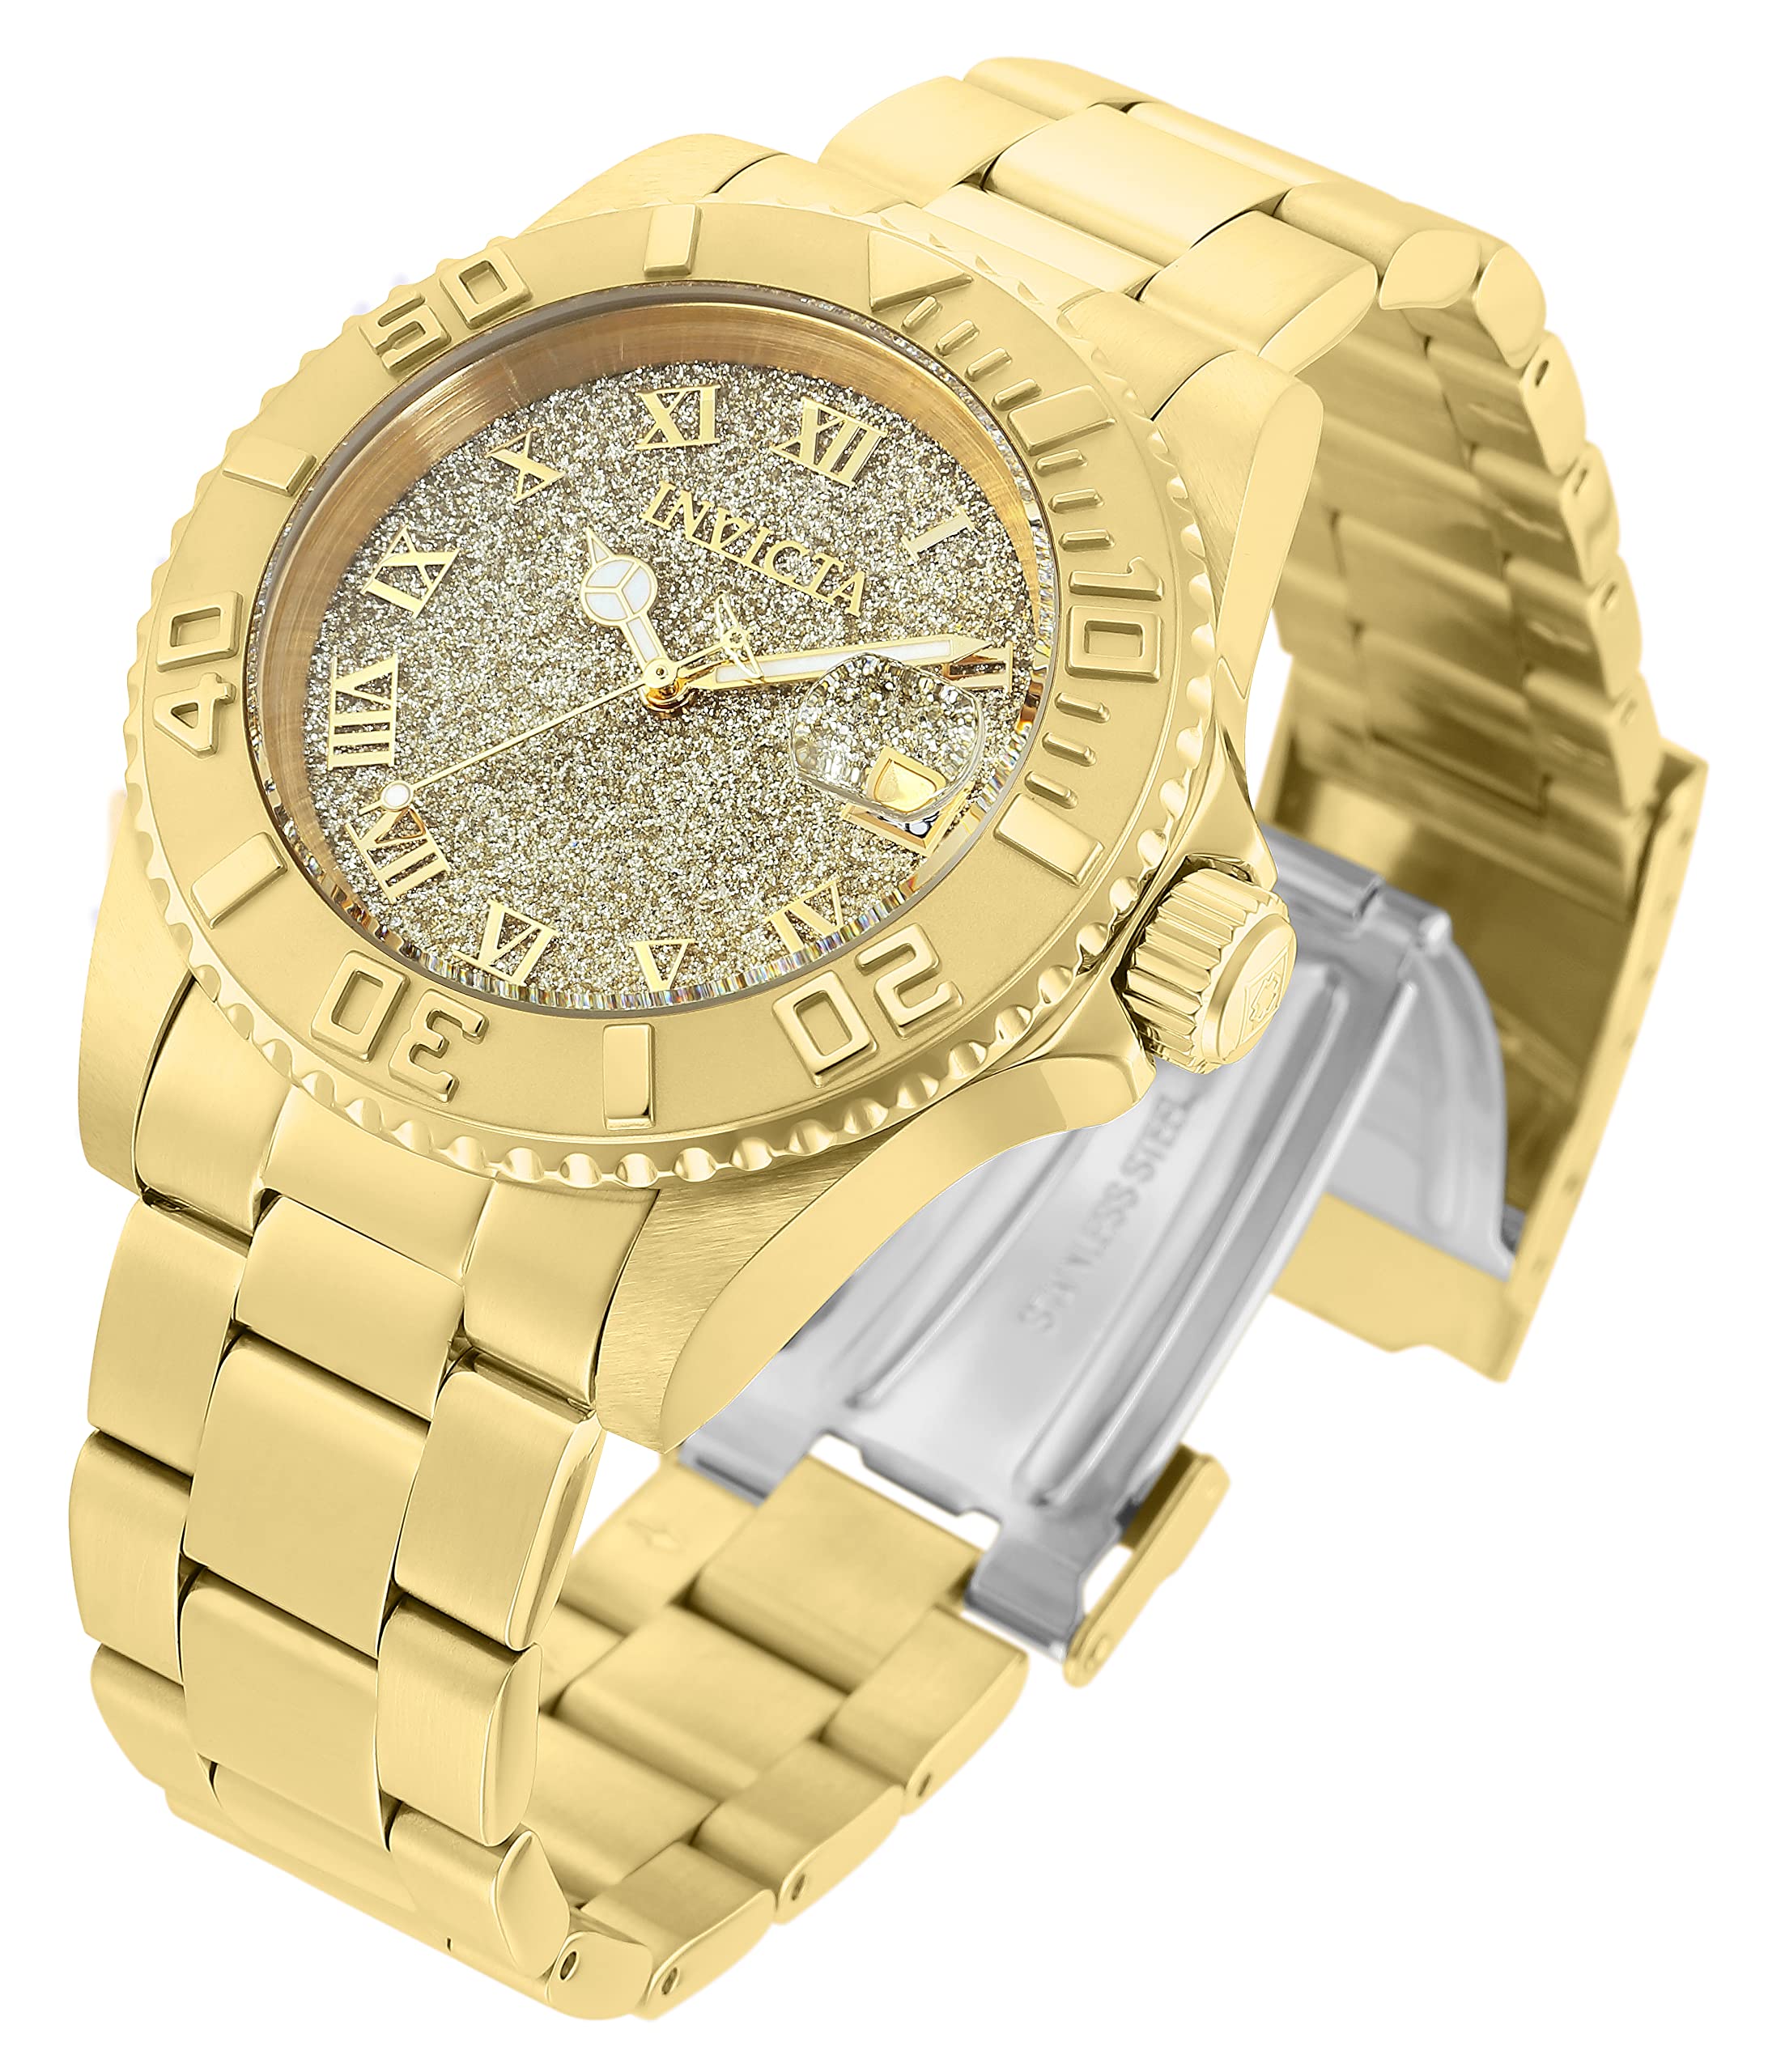 Invicta Women's Angel Stainless Steel Swiss-Quartz Watch with Stainless-Steel Strap